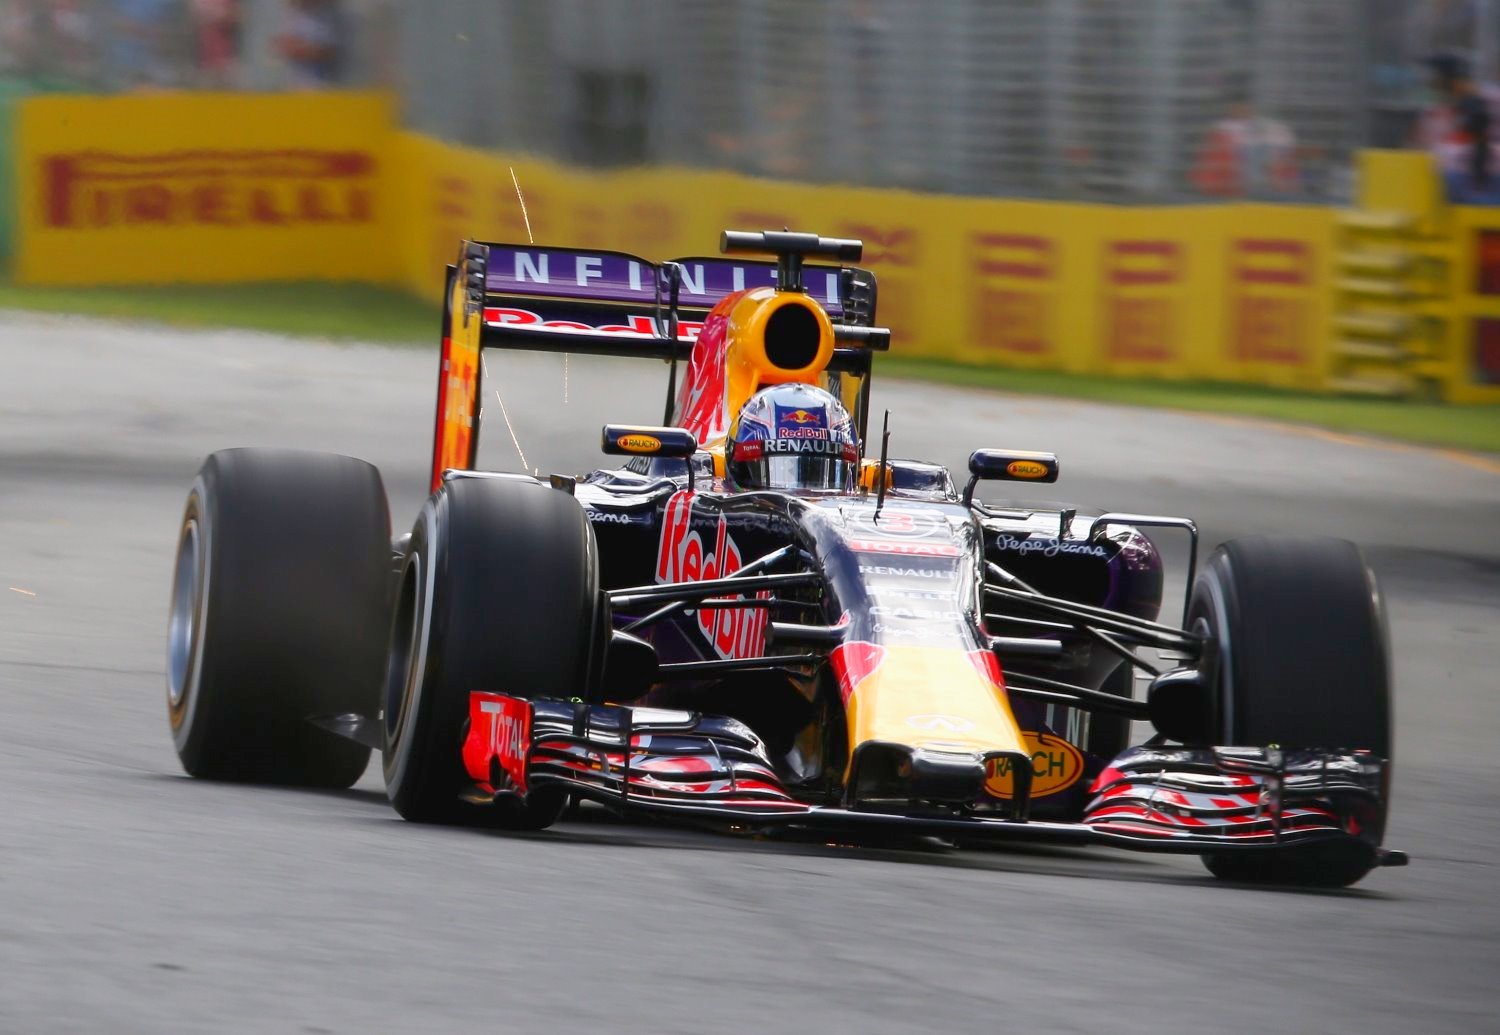 Red Bull cannot catch up with a Renault engine